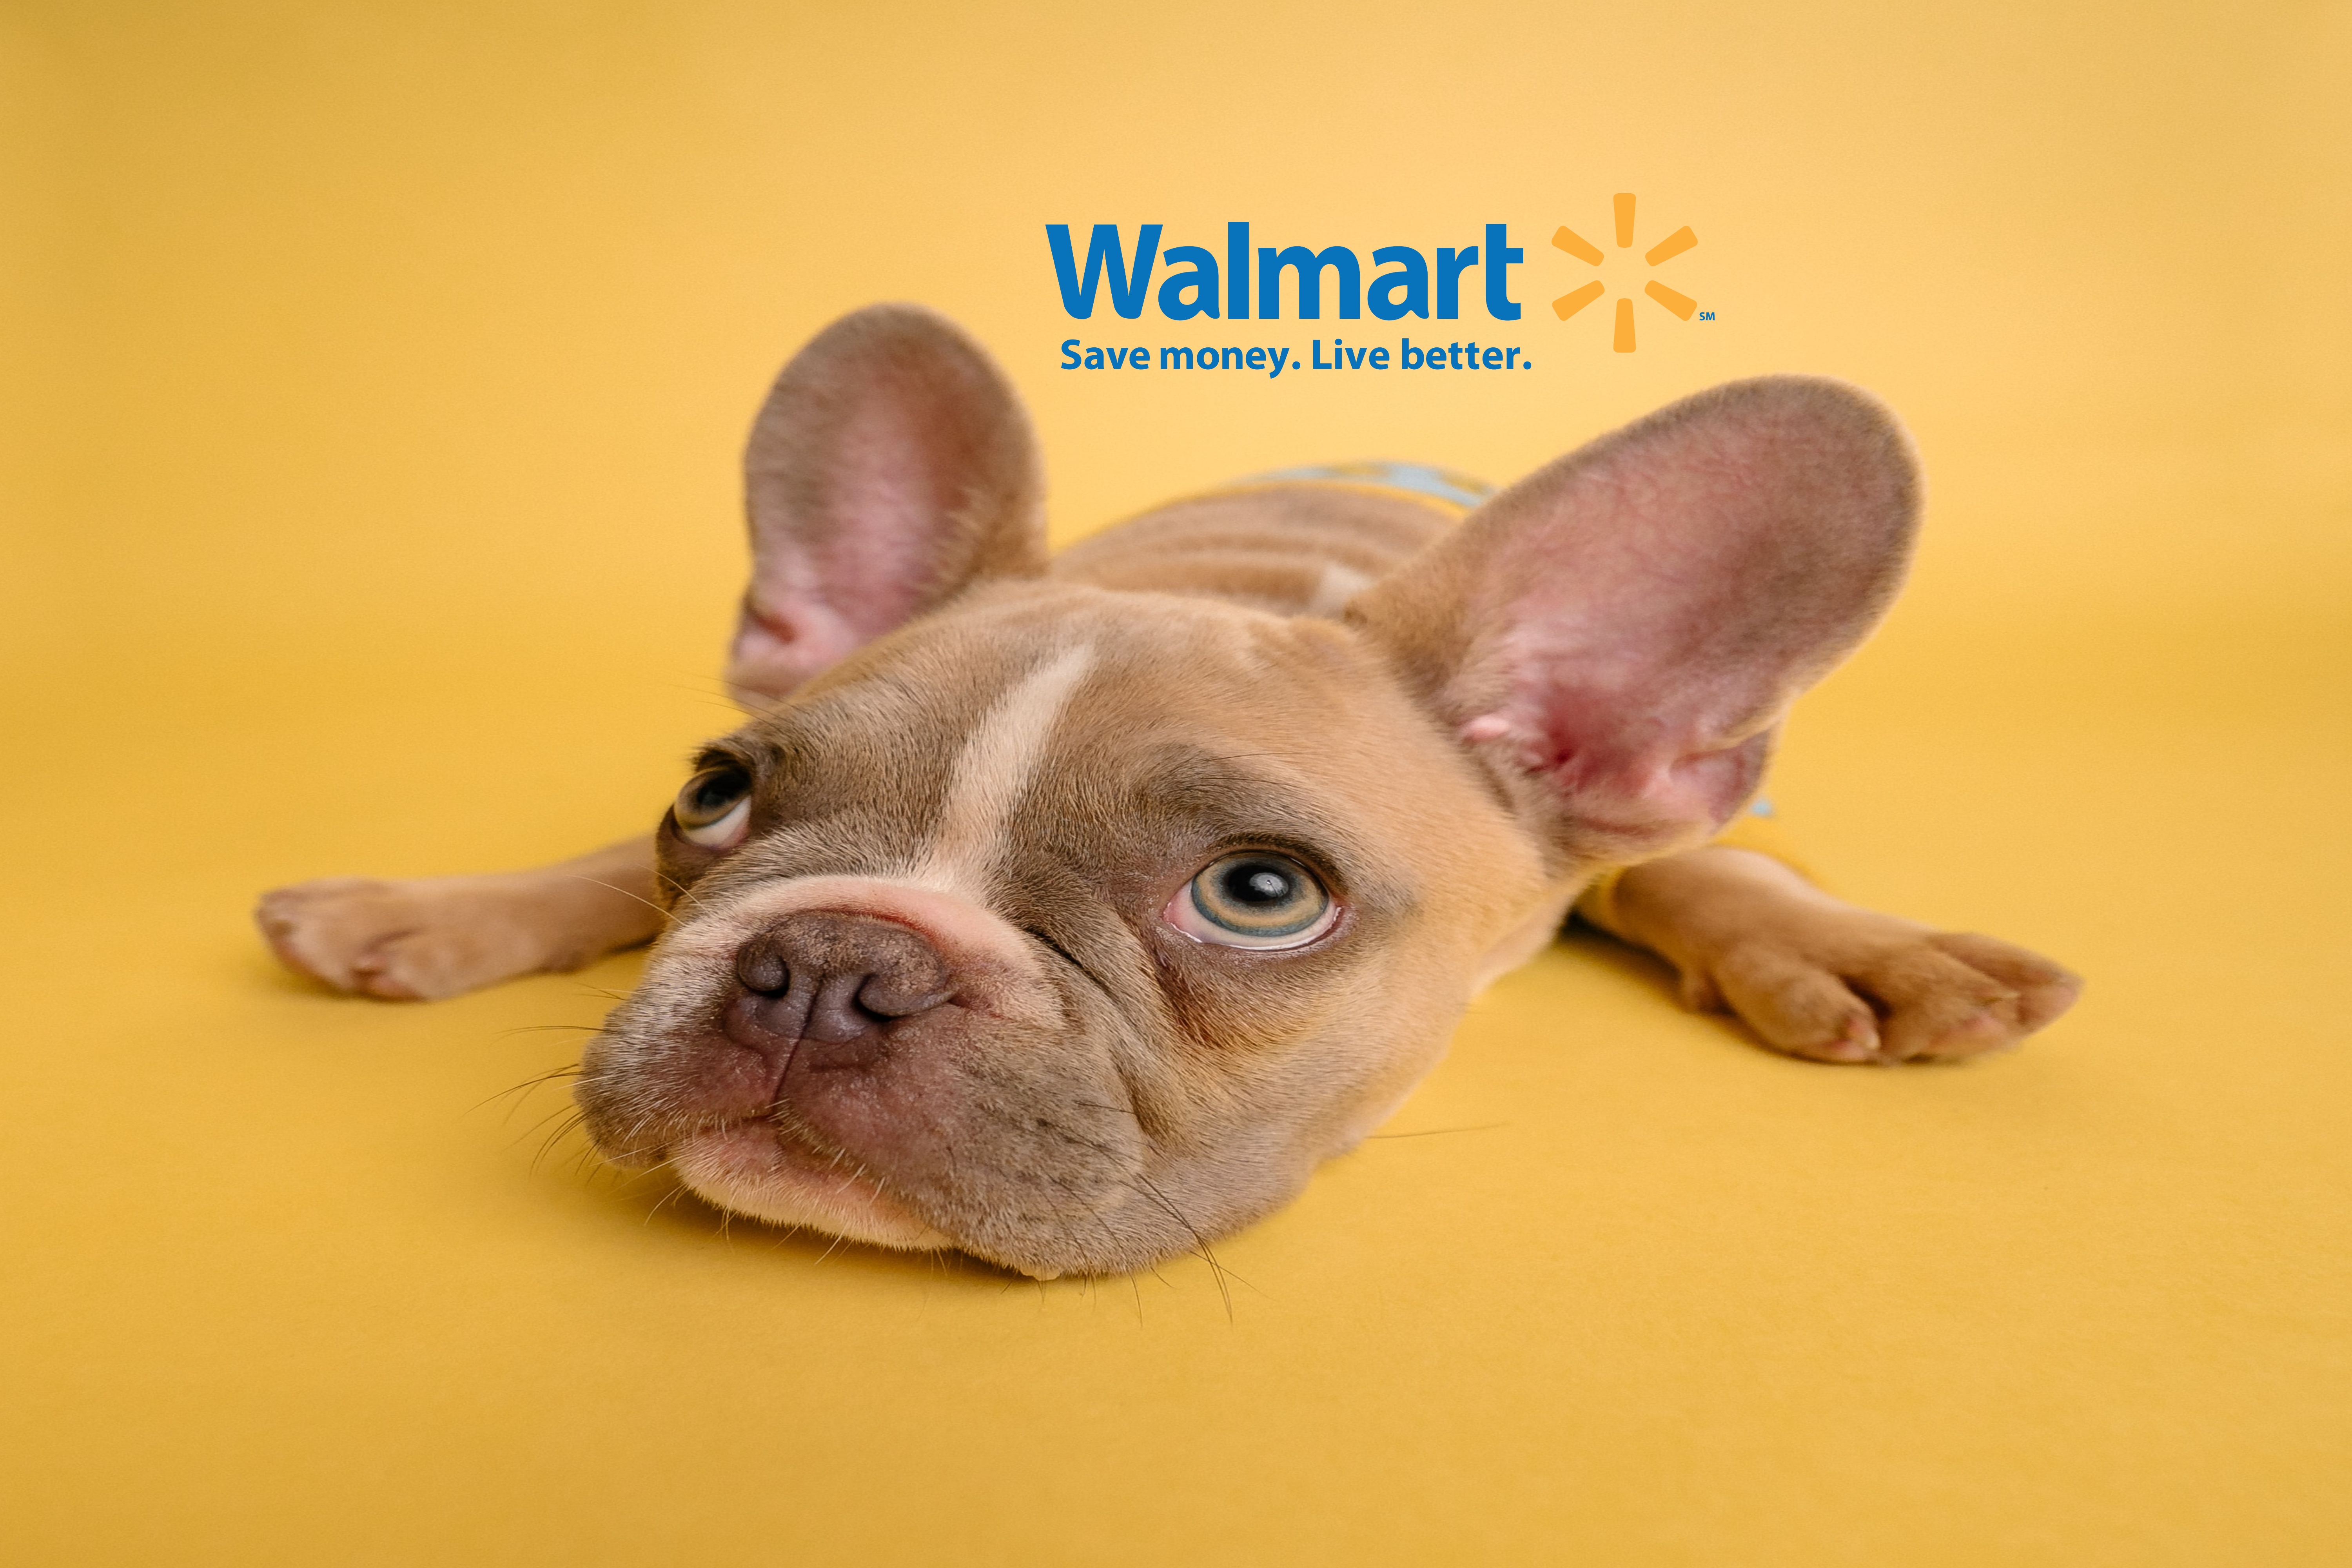 Walmart to partner with Pawp, to offer pet telehealth to subscribers